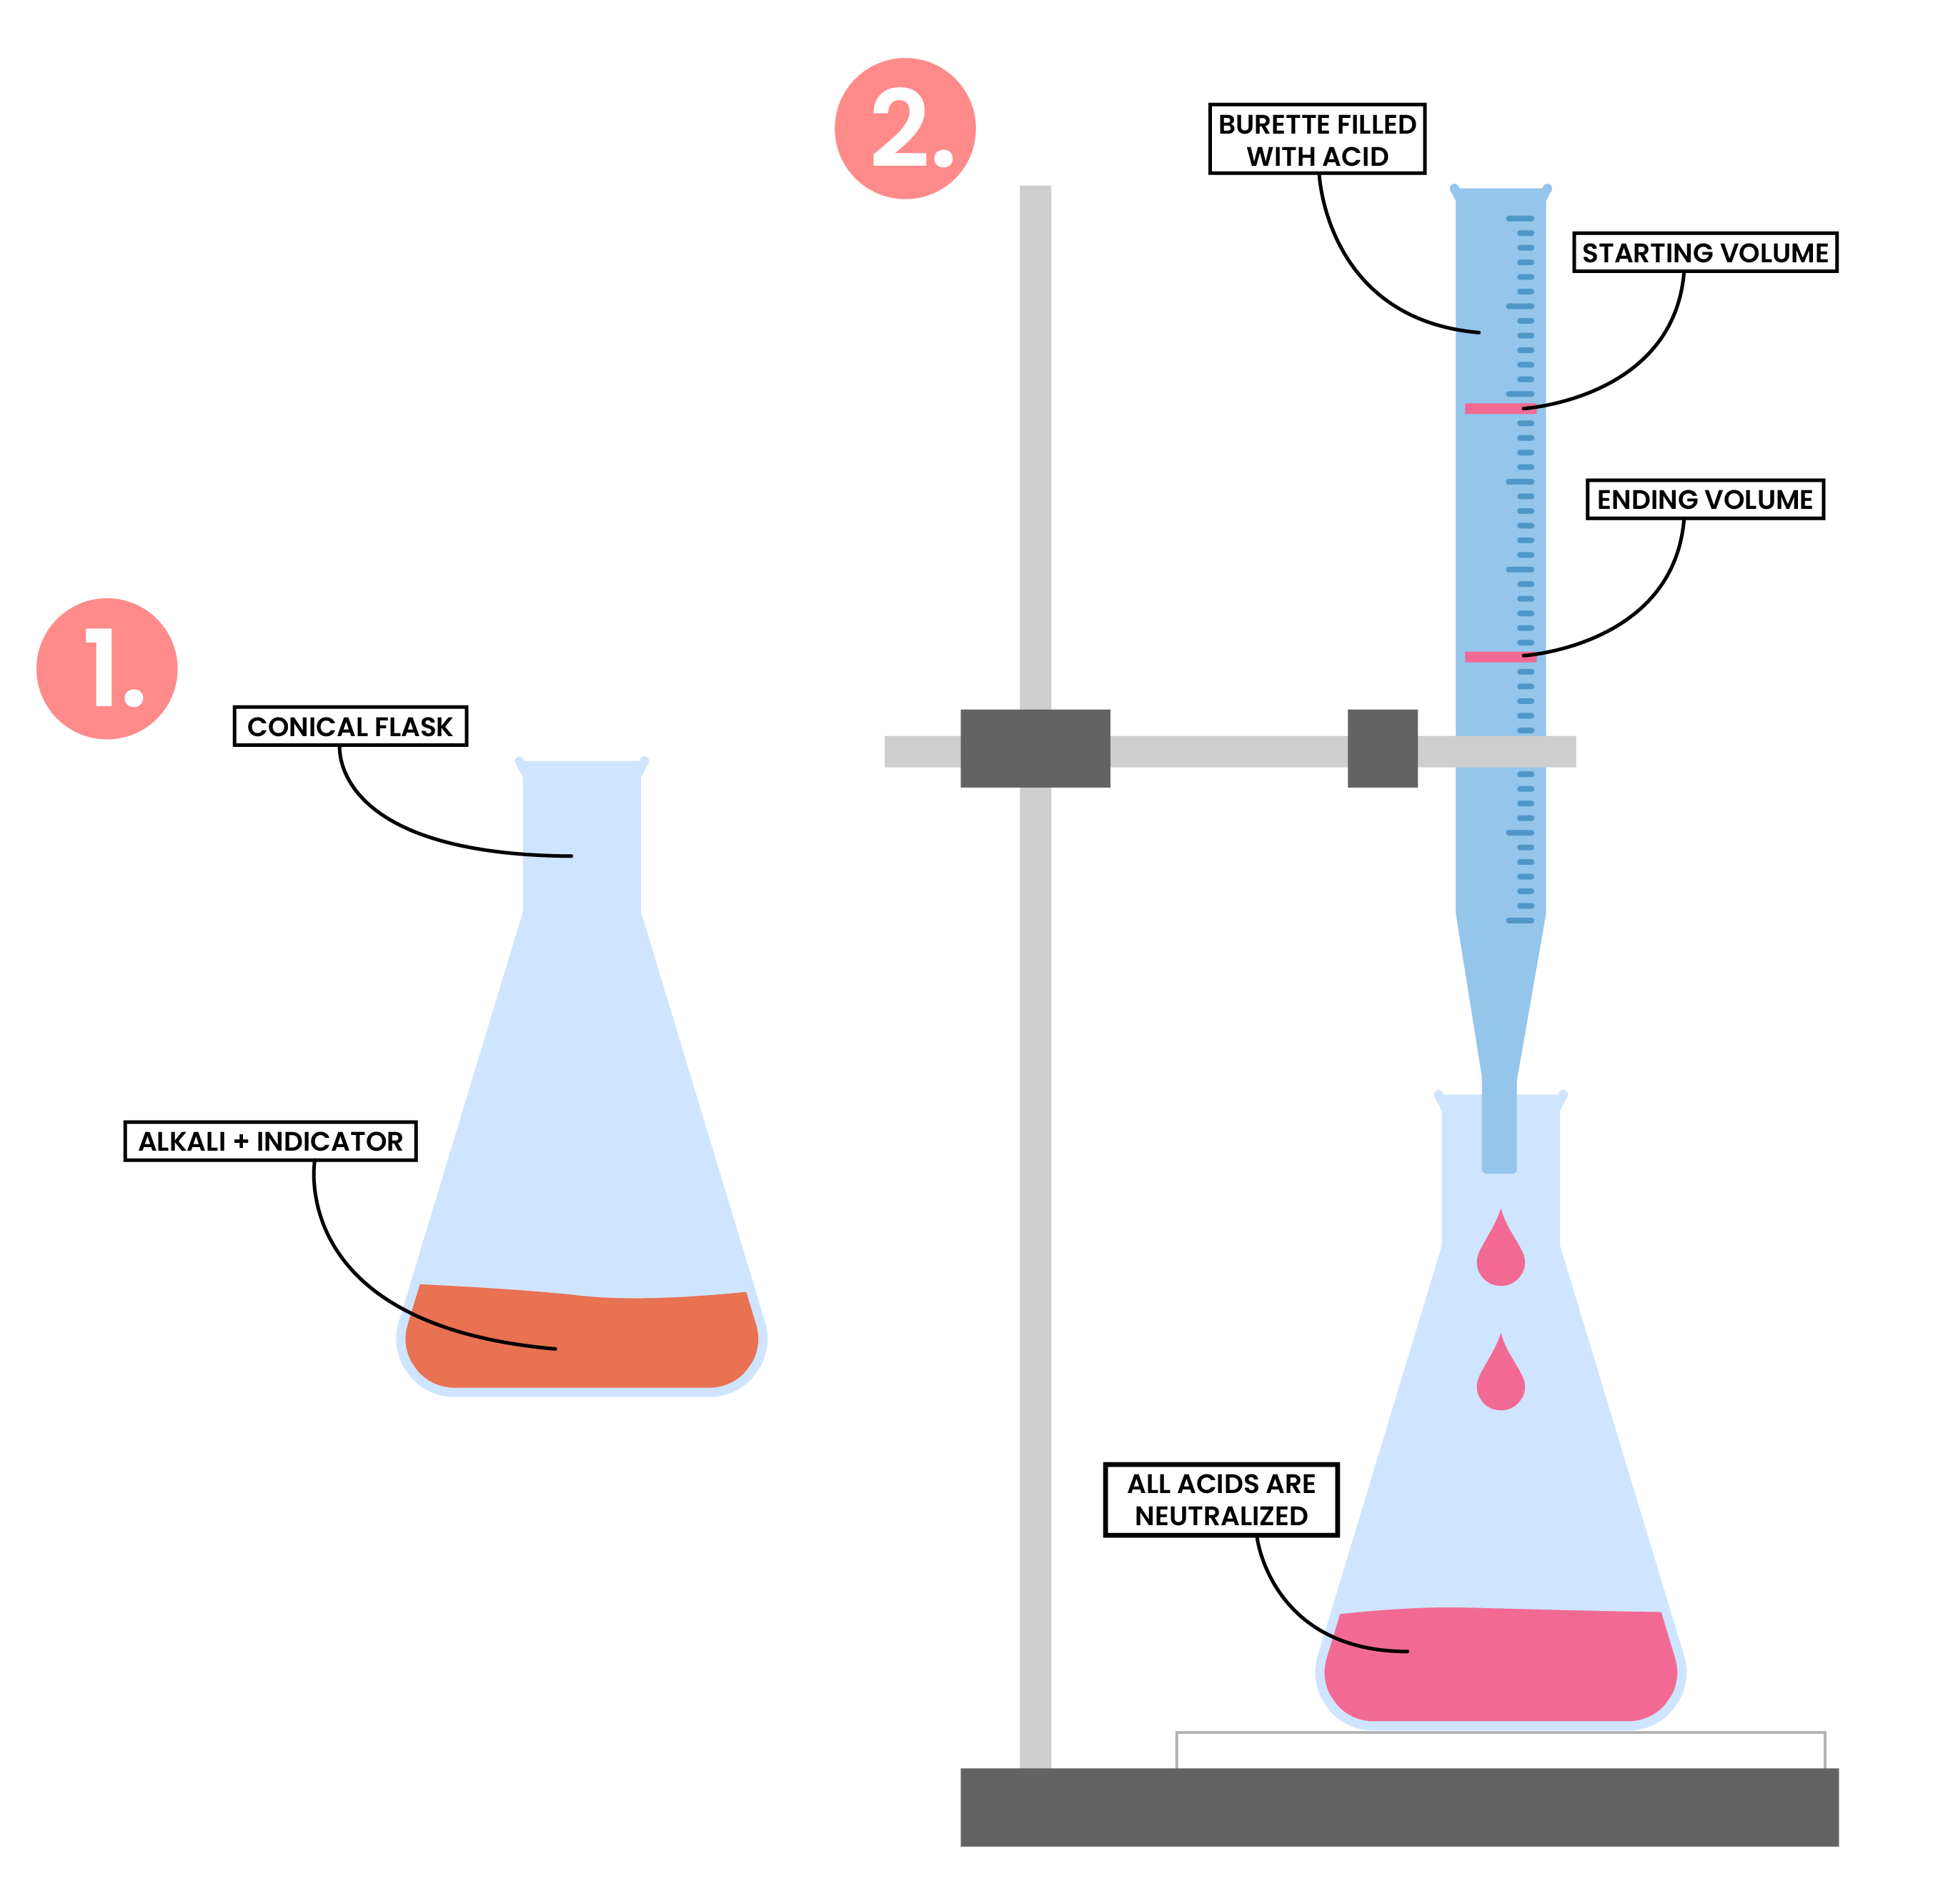 edexcel_igcse_chemistry_topic 16_acids, bases, and salt preparations_004_titration of salts step by step diagram labelled